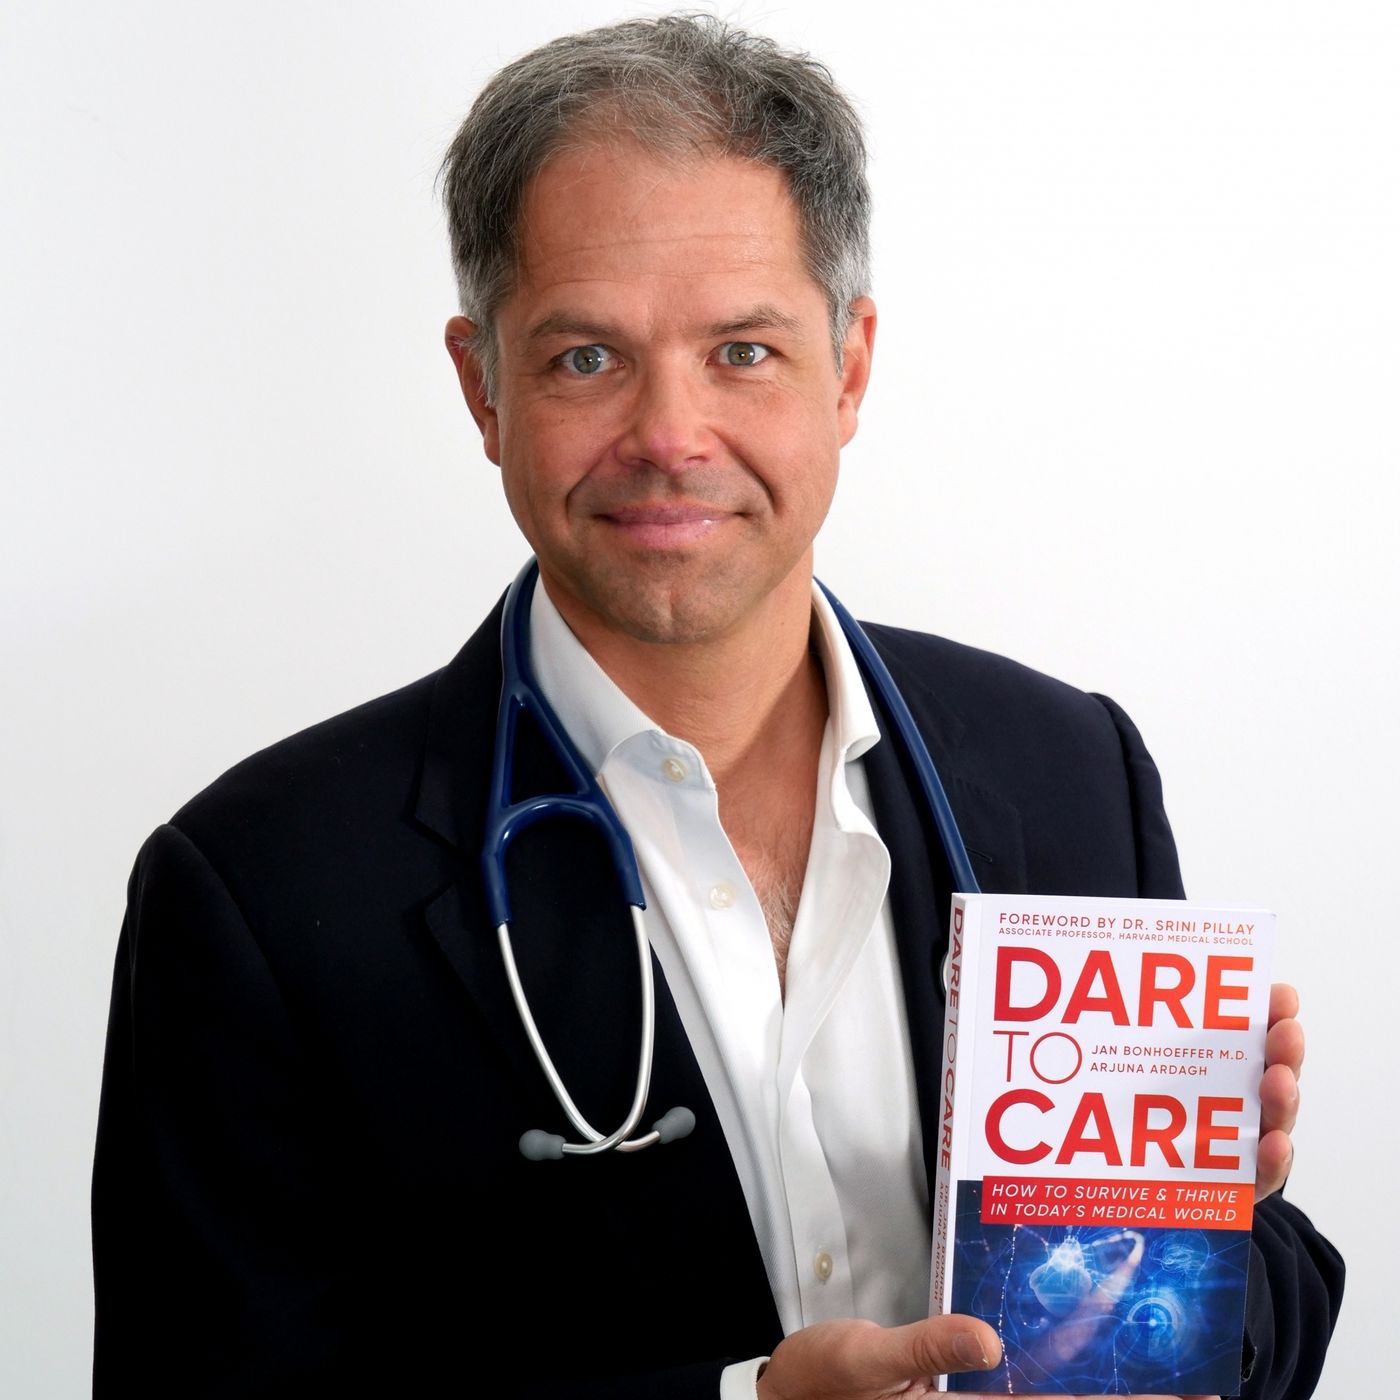 Dare to Care How to Survive and Thrive in Today’s Medical World with Dr. Jan Bonhoeffer